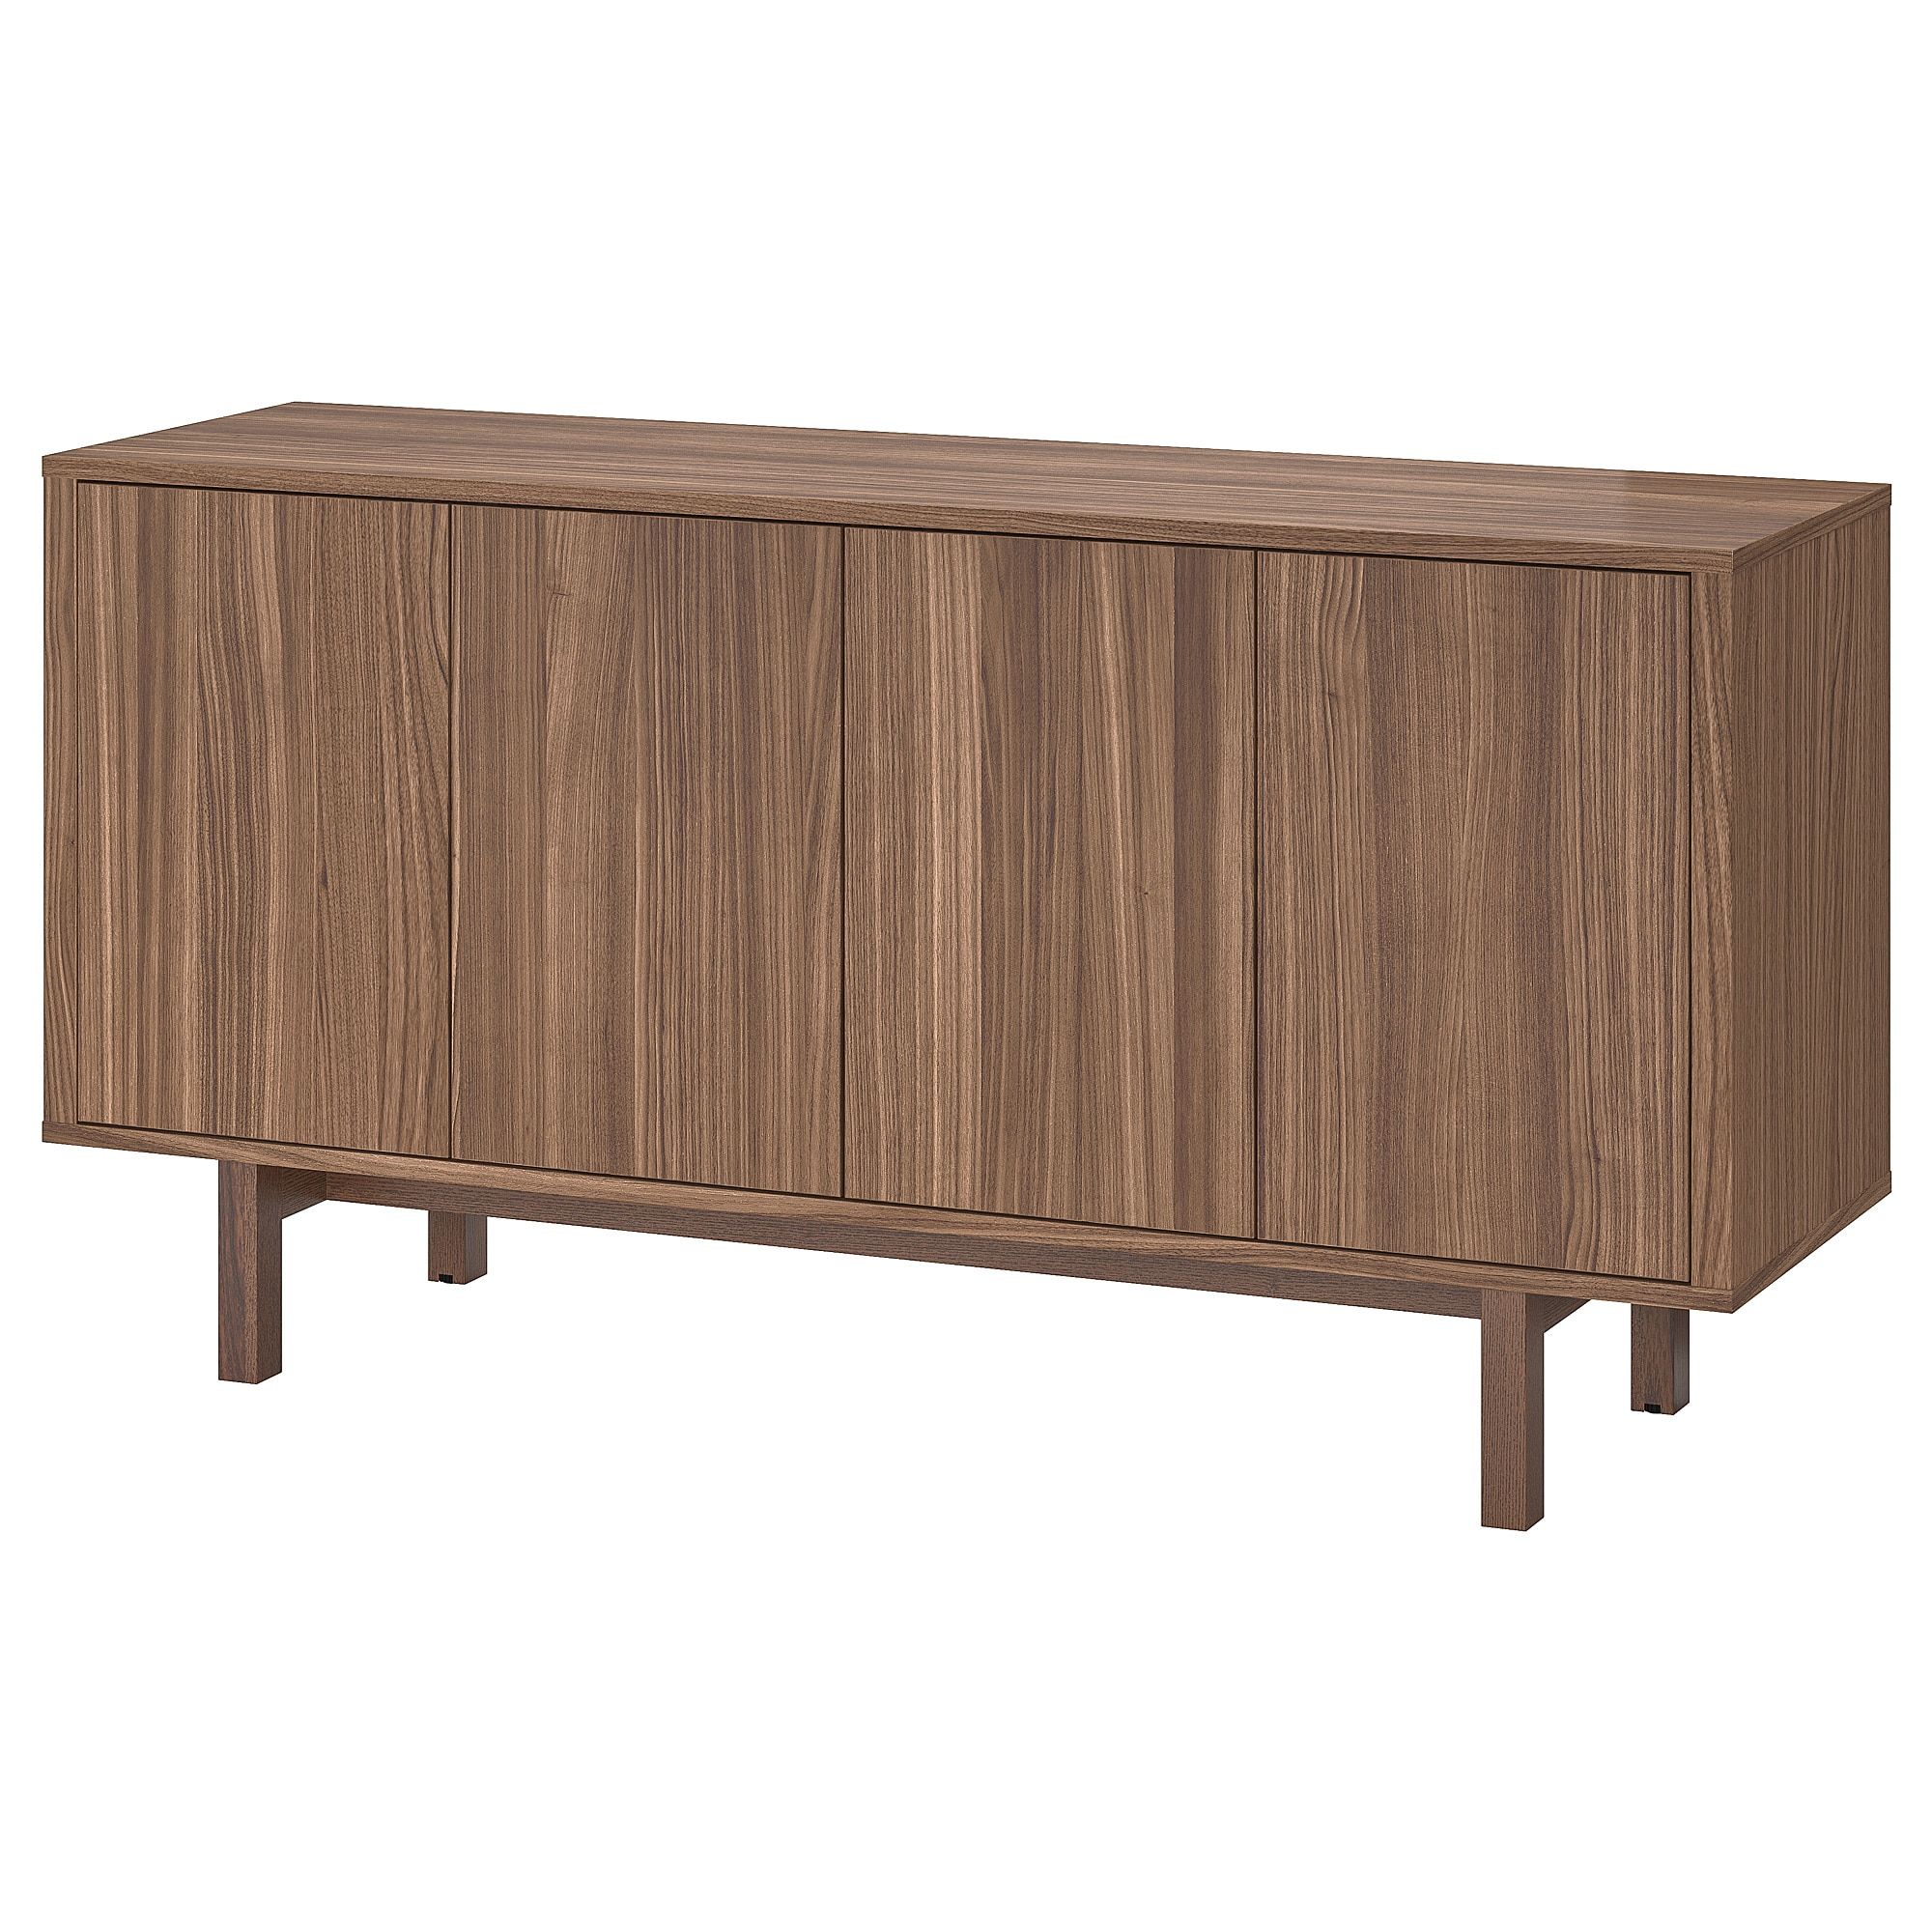 Stockholm – Sideboard, Walnut Veneer Intended For 2017 South Miami Sideboards (View 9 of 20)